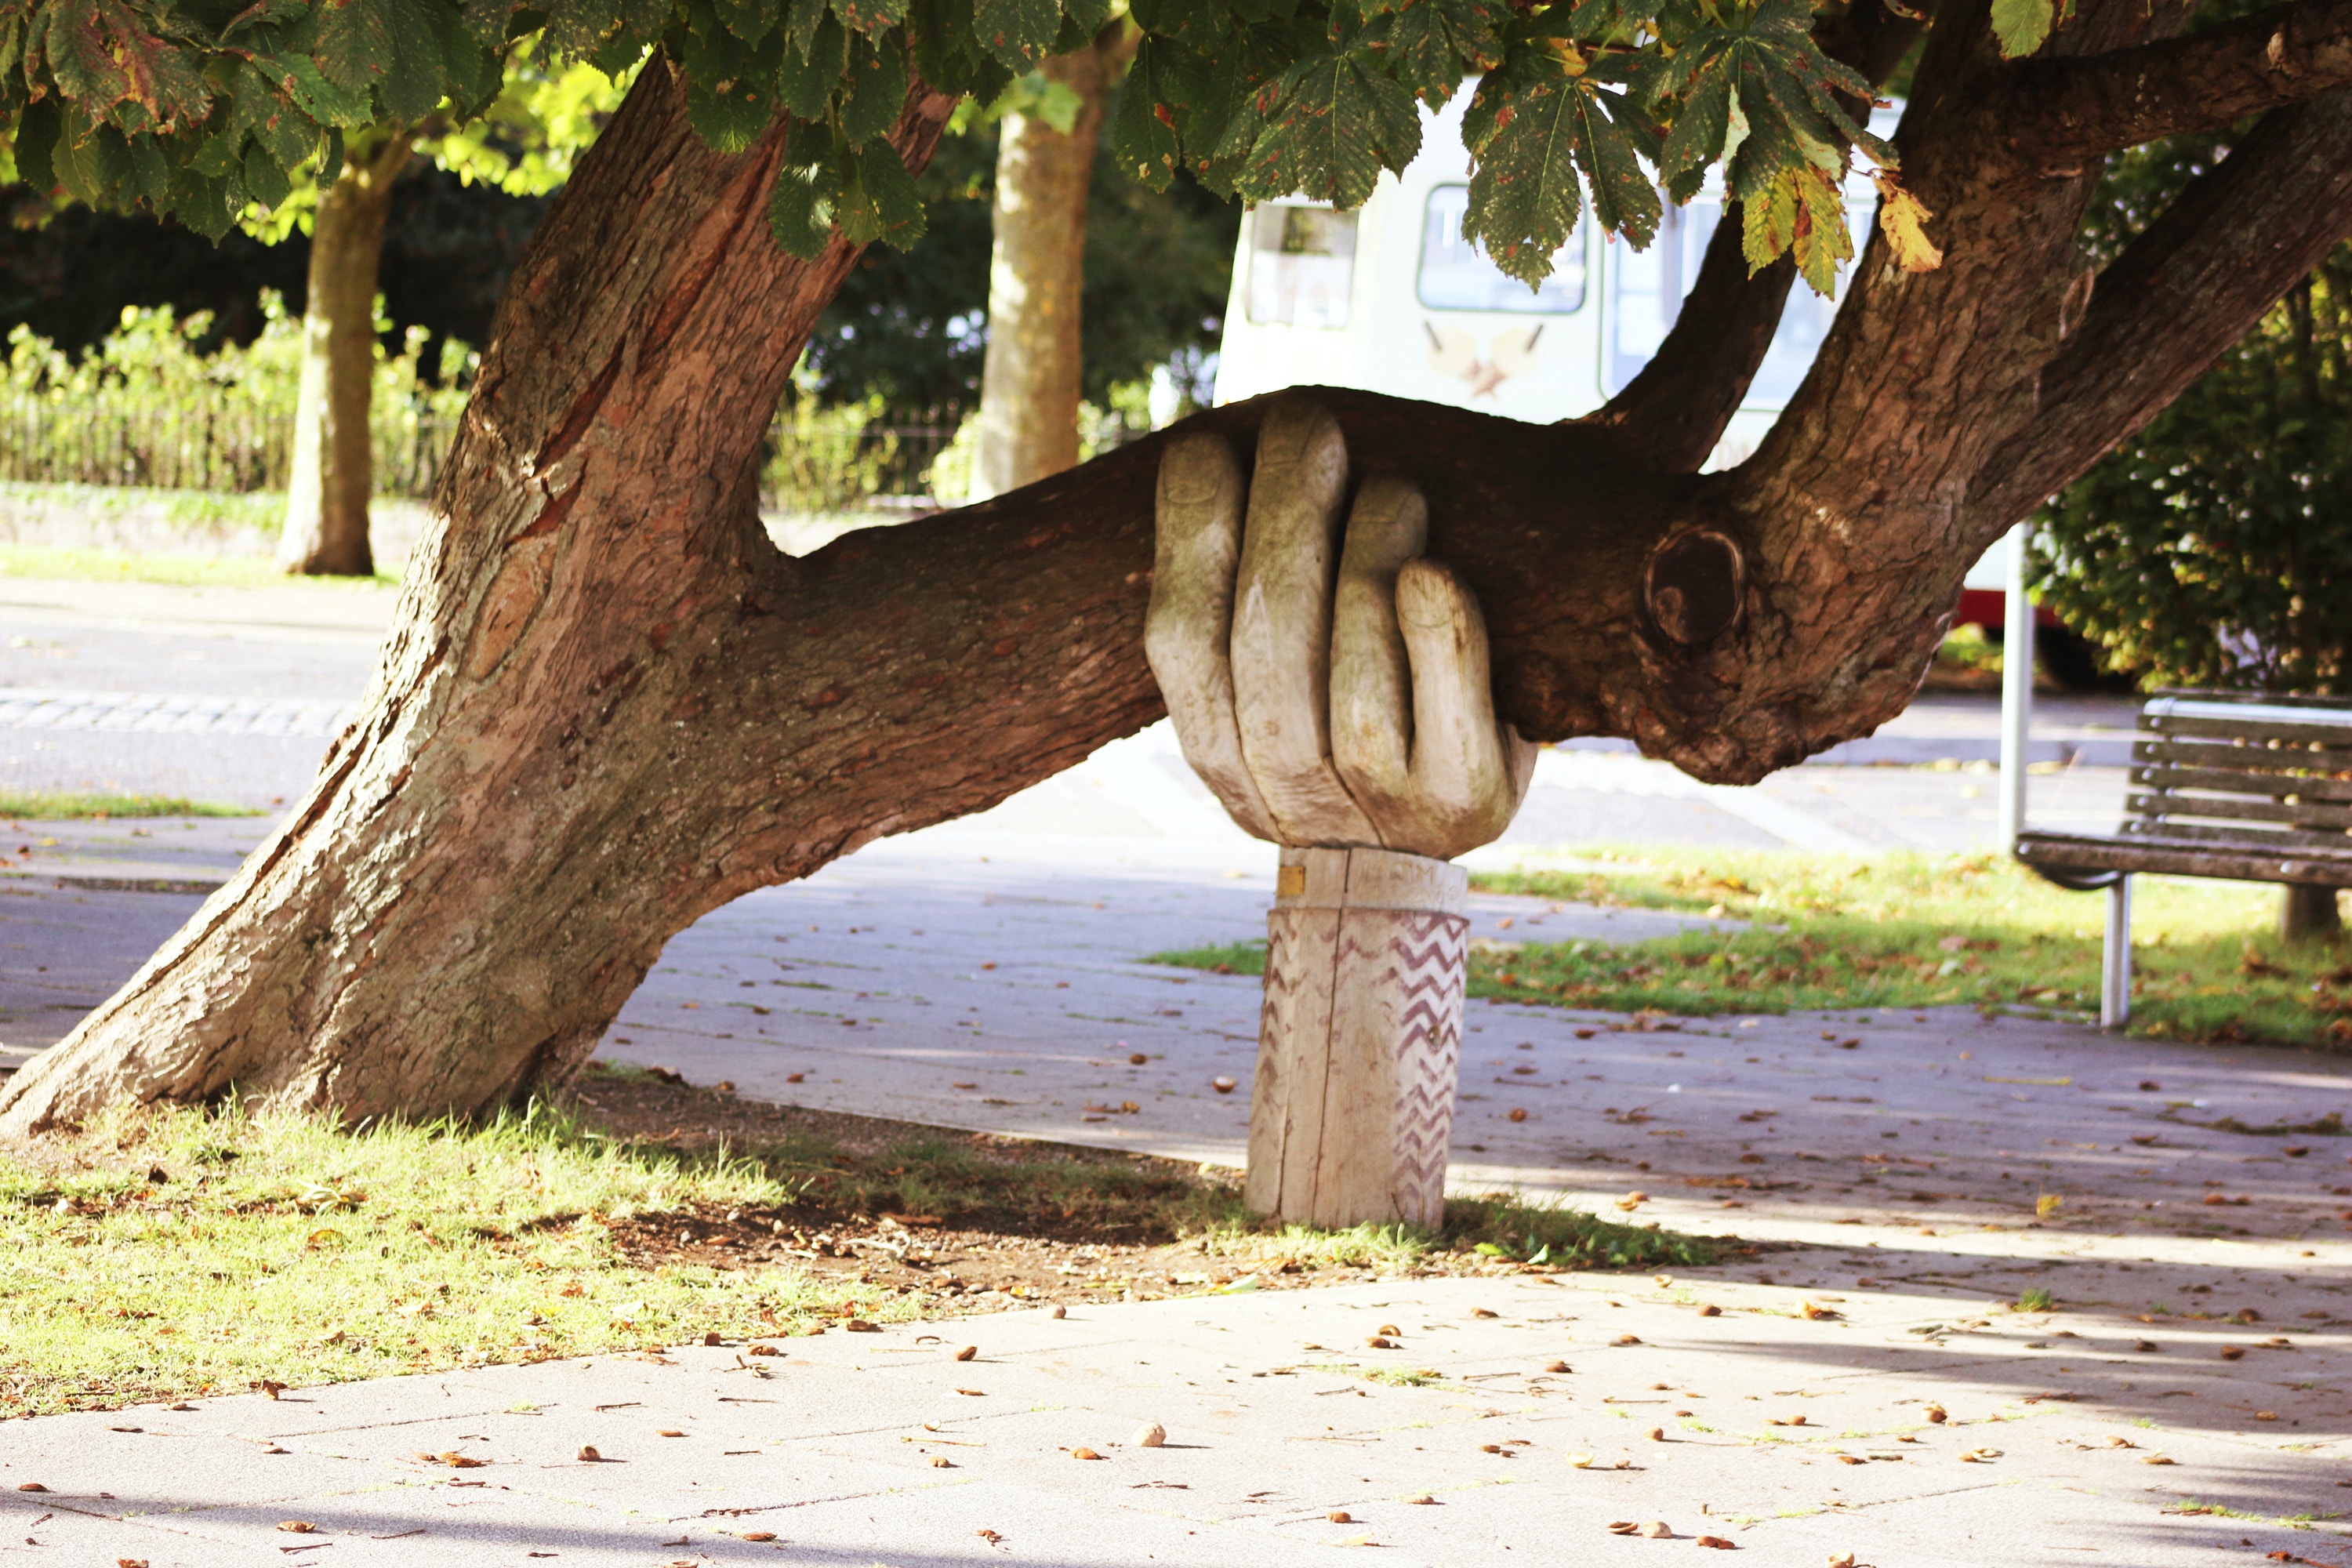 large wooden sculpture in the shape of a hand holds up a tree branch